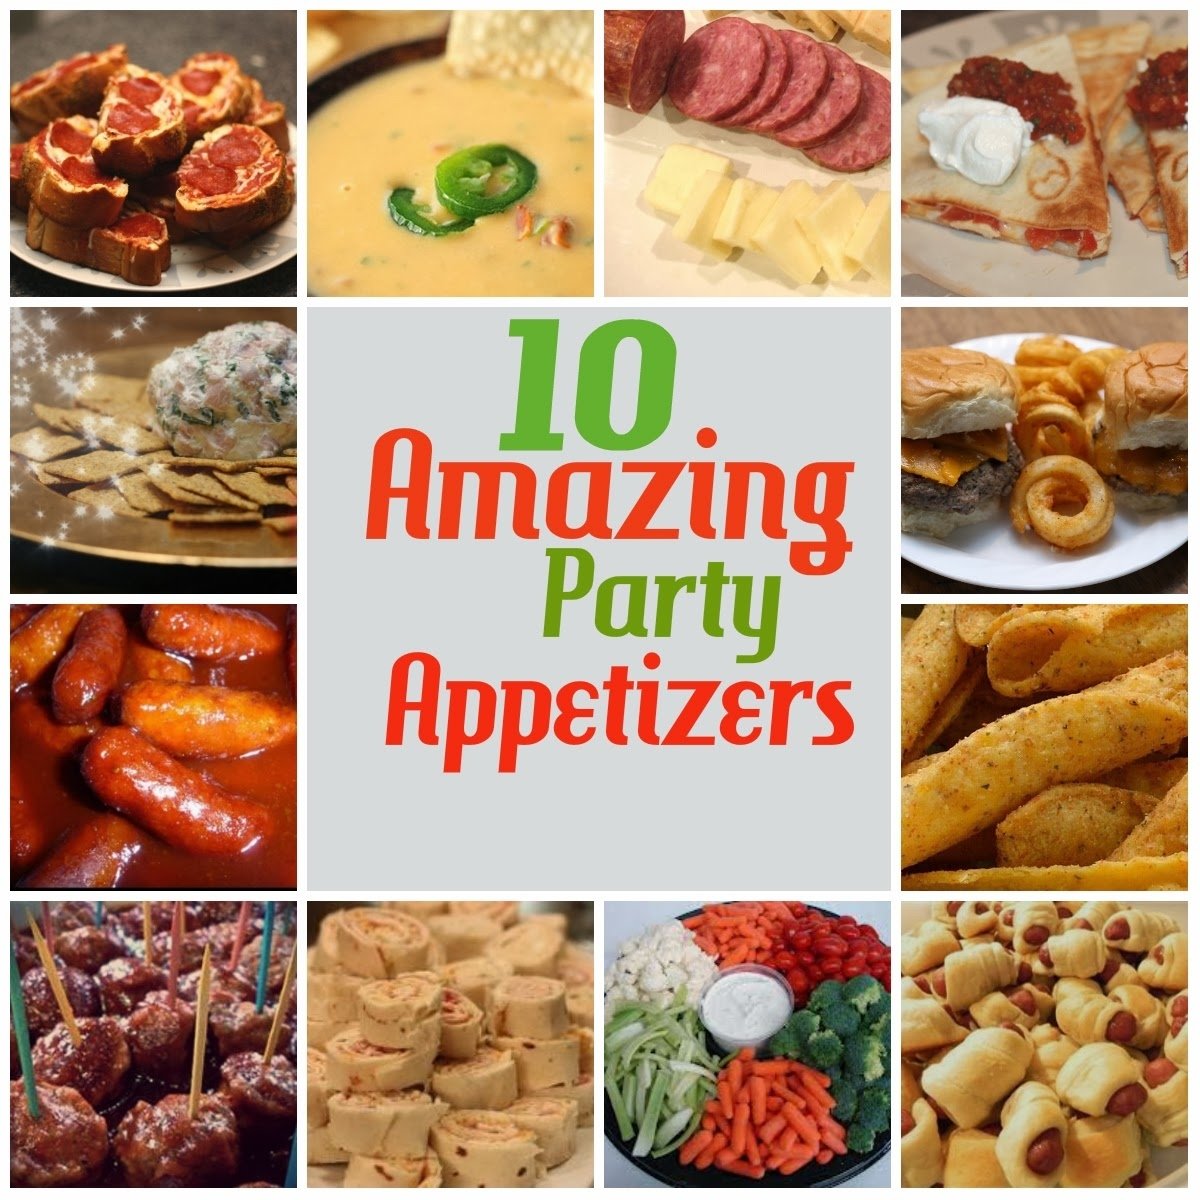 10 Wonderful 12 Days Of Christmas Food Ideas crafty allie 12 days of christmas day 11 amazing party appetizers 2022